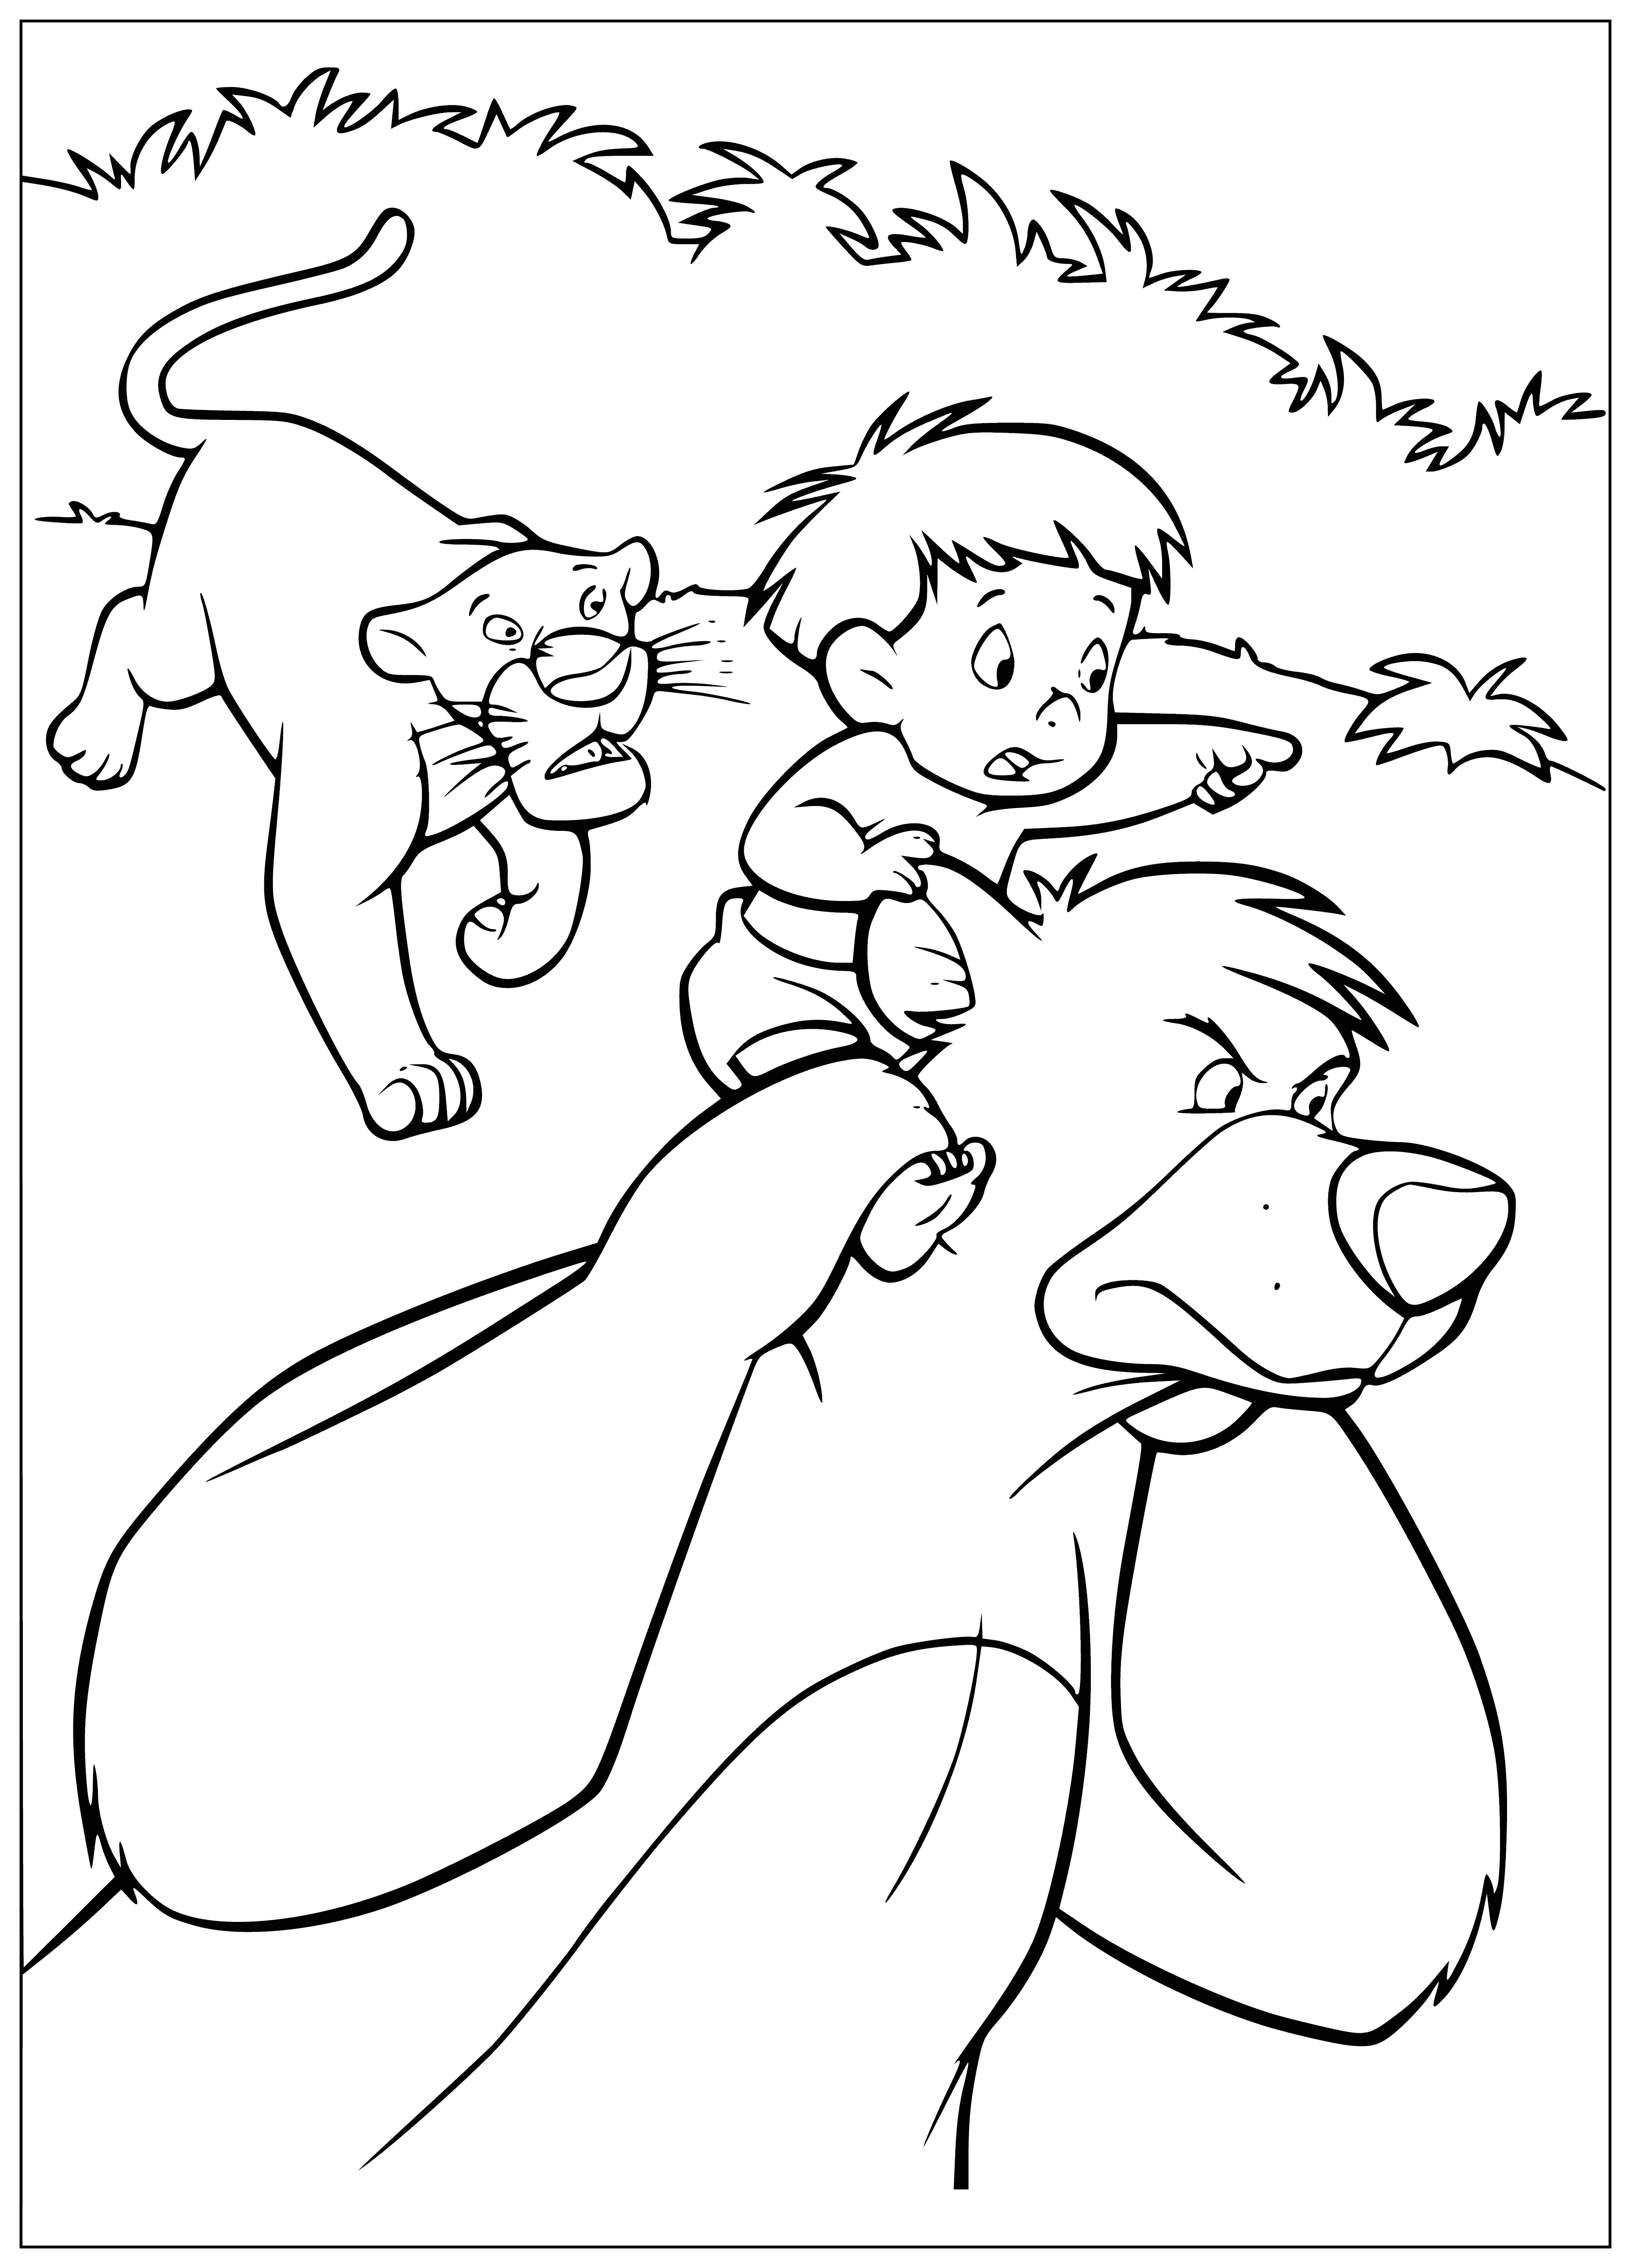 coloring page: Mowgli in danger surrounded by attacking animals - looks scared & ready to be attacked. #JungleBook